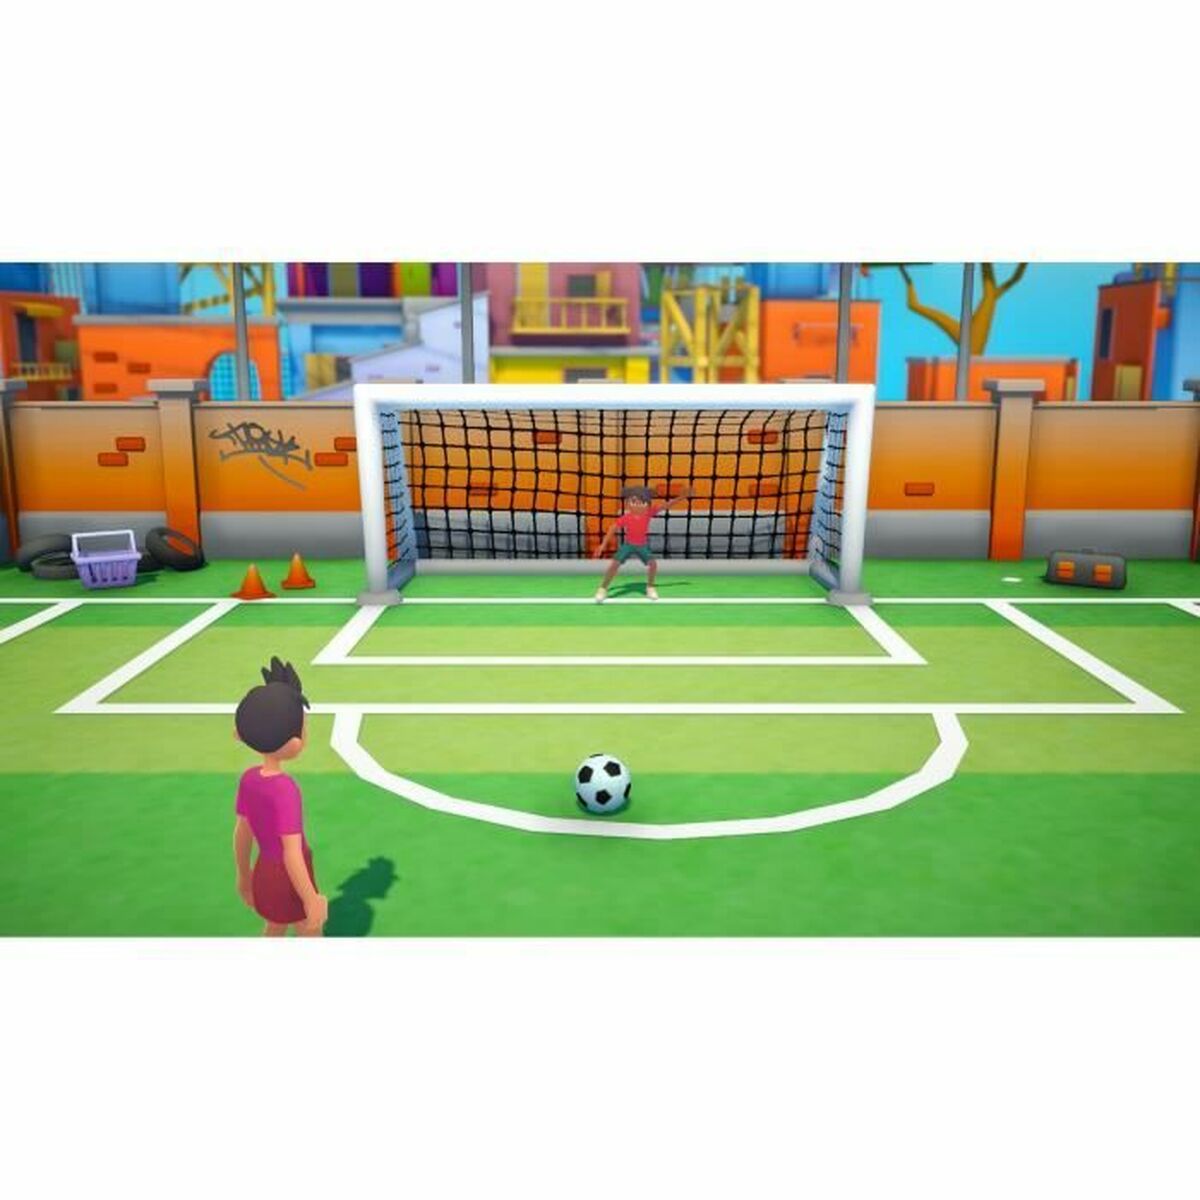 Videogioco per Switch Just For Games 30 Sports Games in 1 (EN)